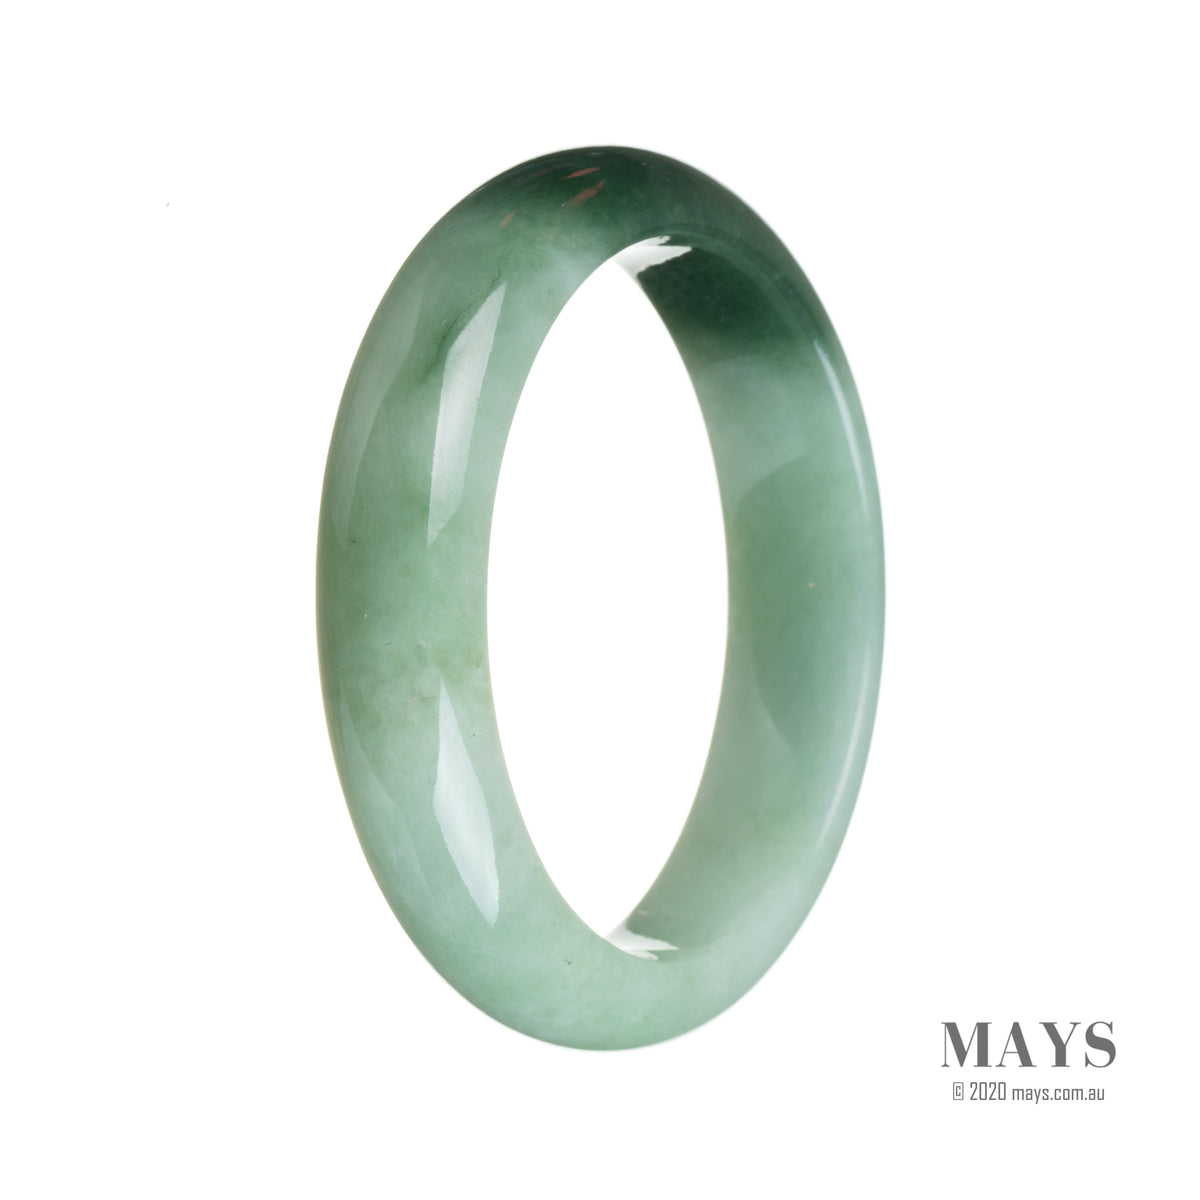 A close-up image of a green and dark green jade bangle with a half-moon shape, showcasing its natural beauty and authenticity.